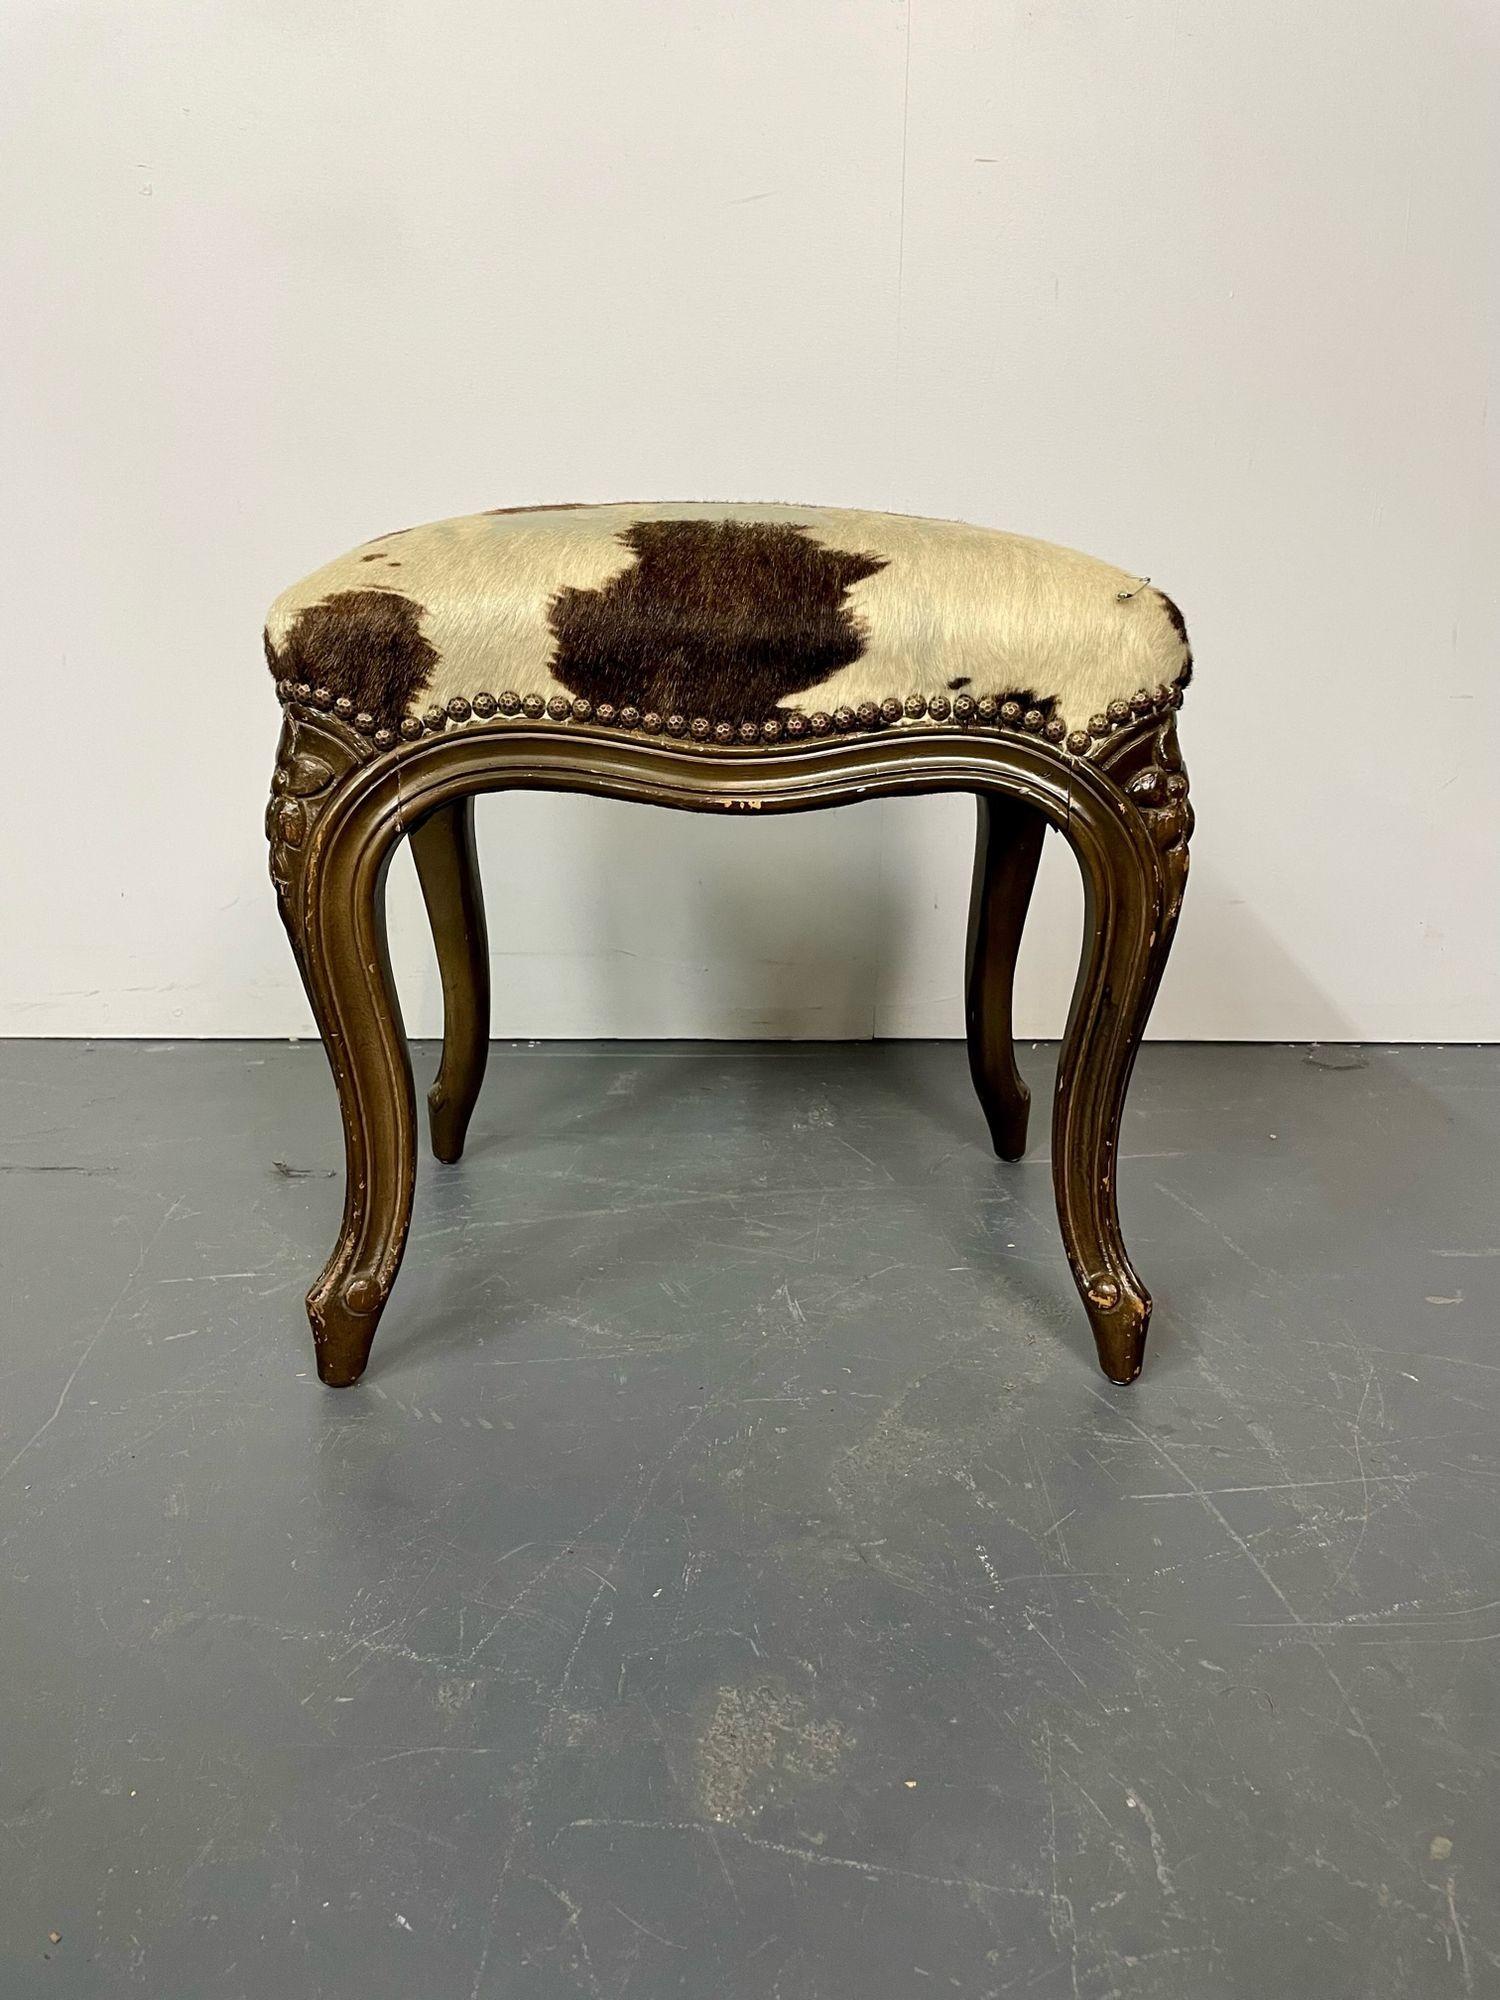 Pony Skin upholstered, wooden foot stool with brass tack detailing
A Louis XV Style Footstool or Bench having carved walnut legs with a recently upholstered pony skin top. 
17.5H x 17W x 13.5D.